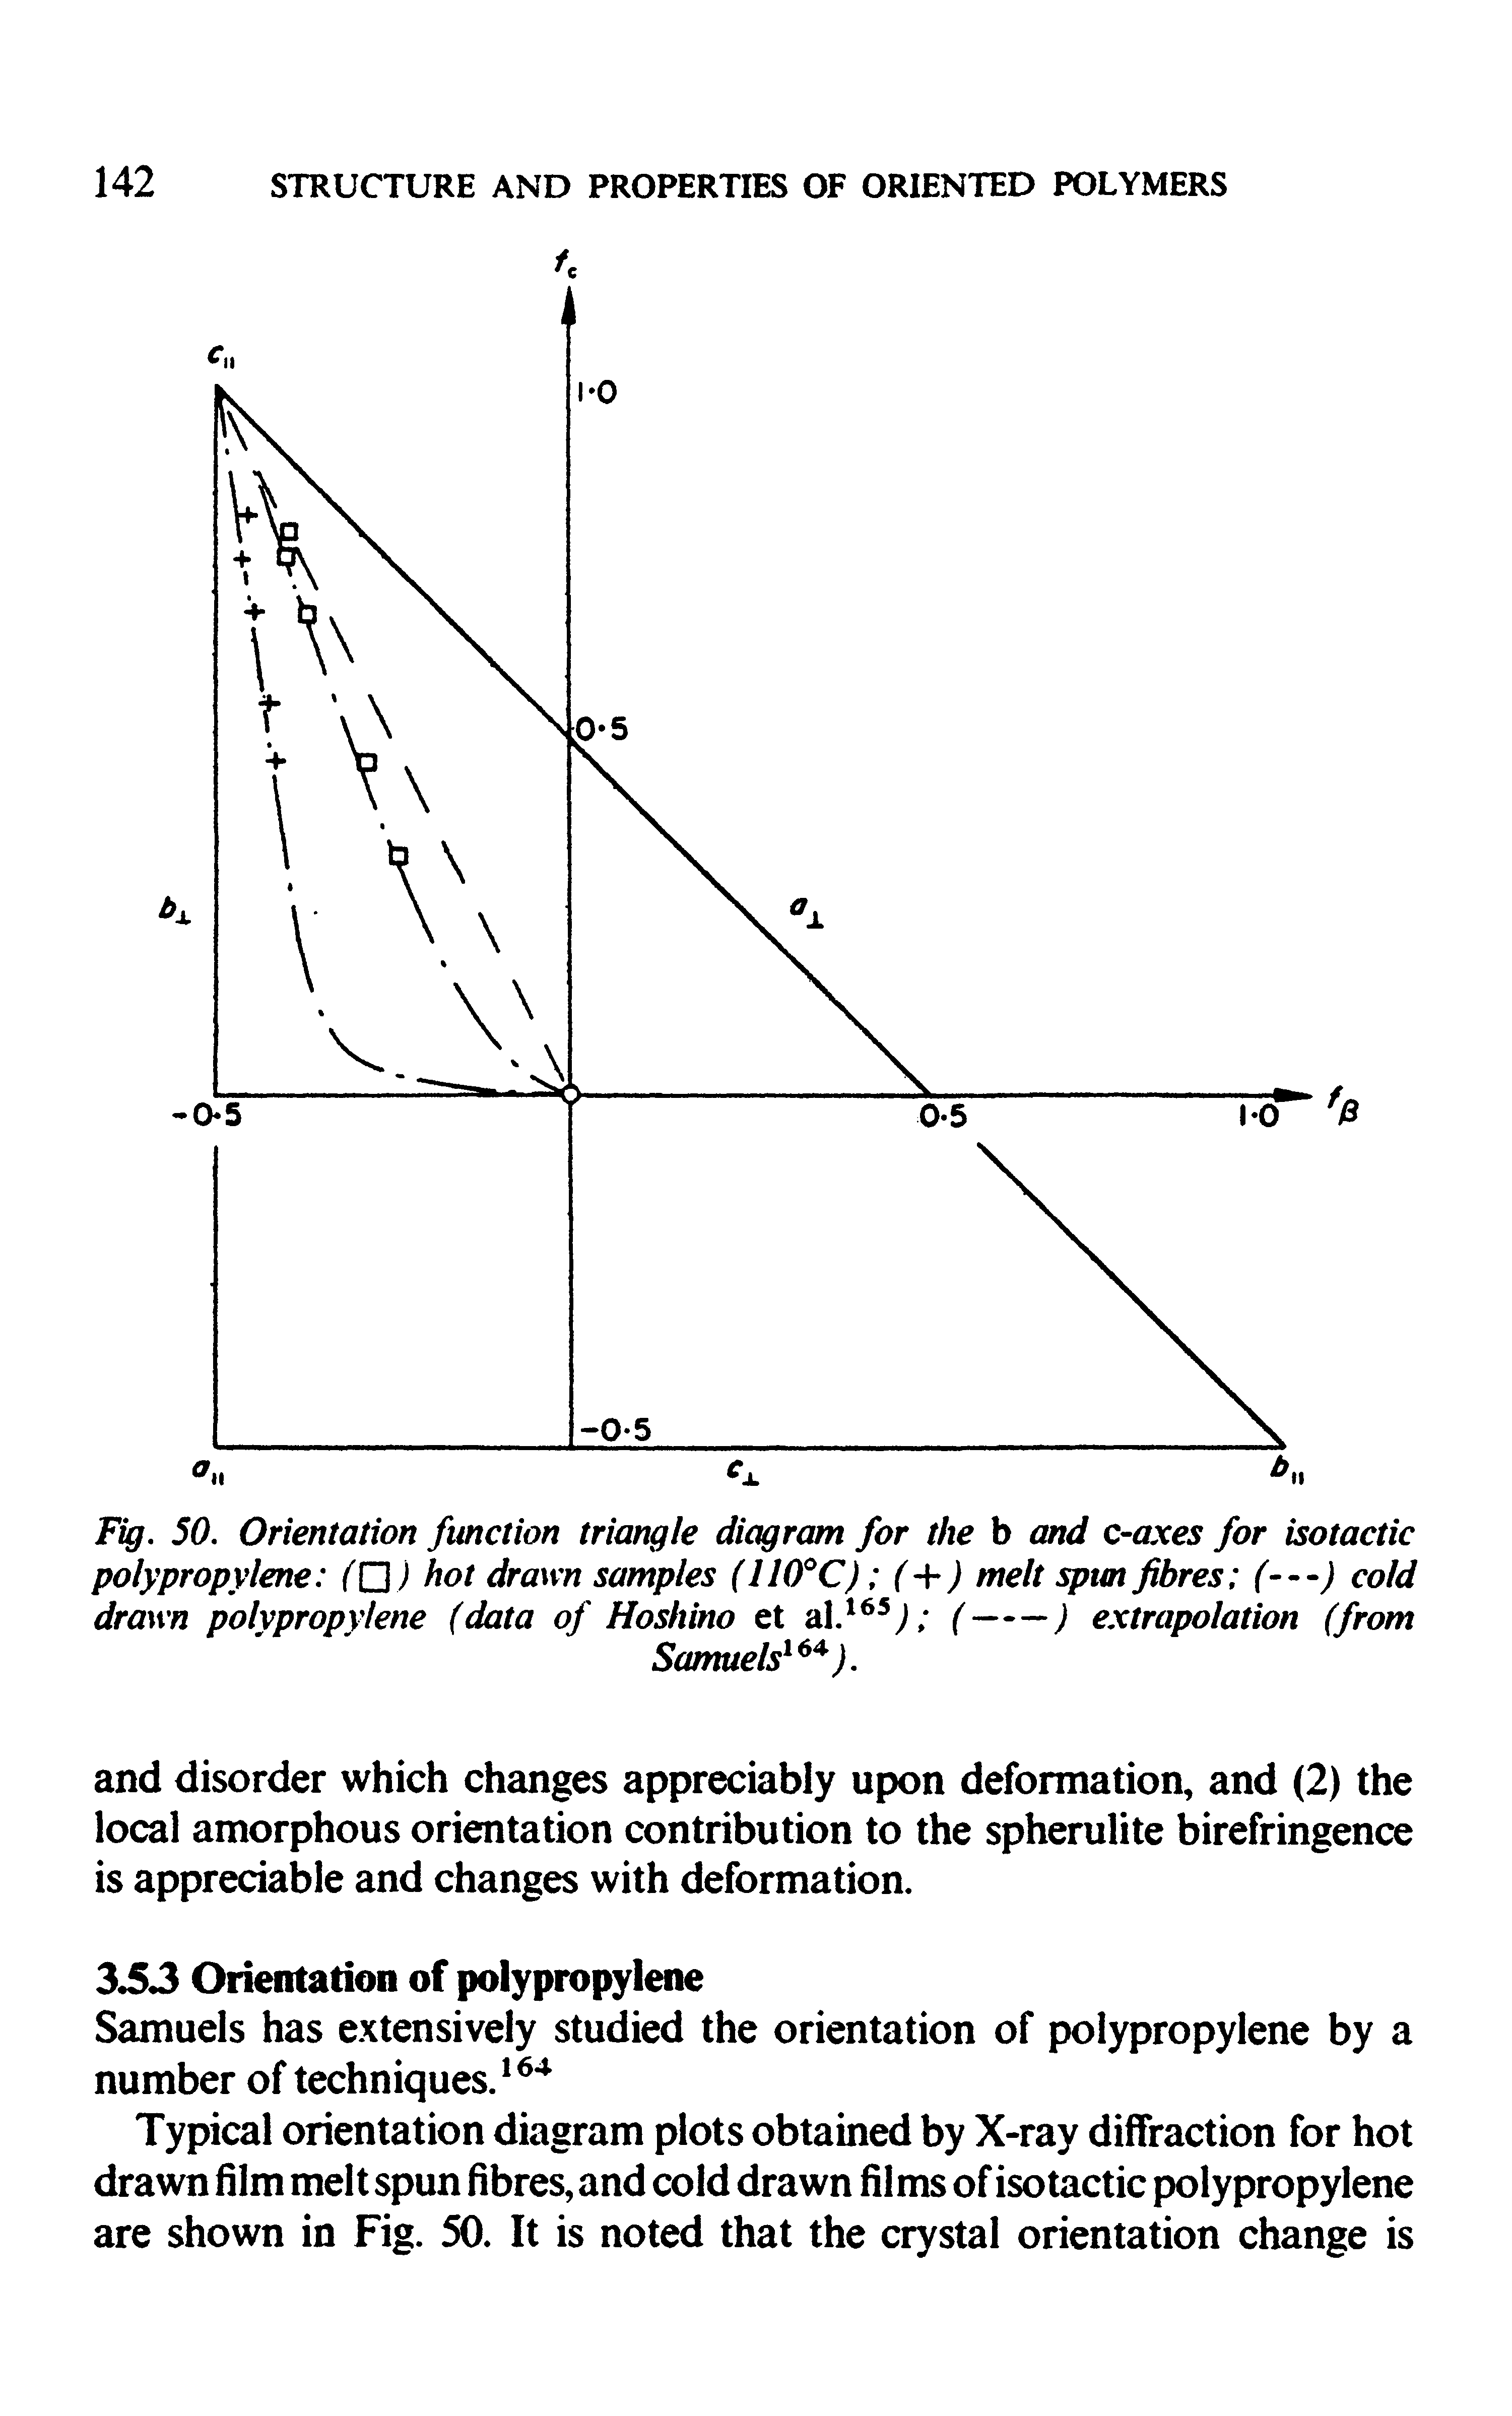 Fig. 50. Orientation function triangle diagram for the b and c-axes for isotactic polypropylene (O) hot drawn samples (Il(fC) ( ) melt spm fibres (—) cold...